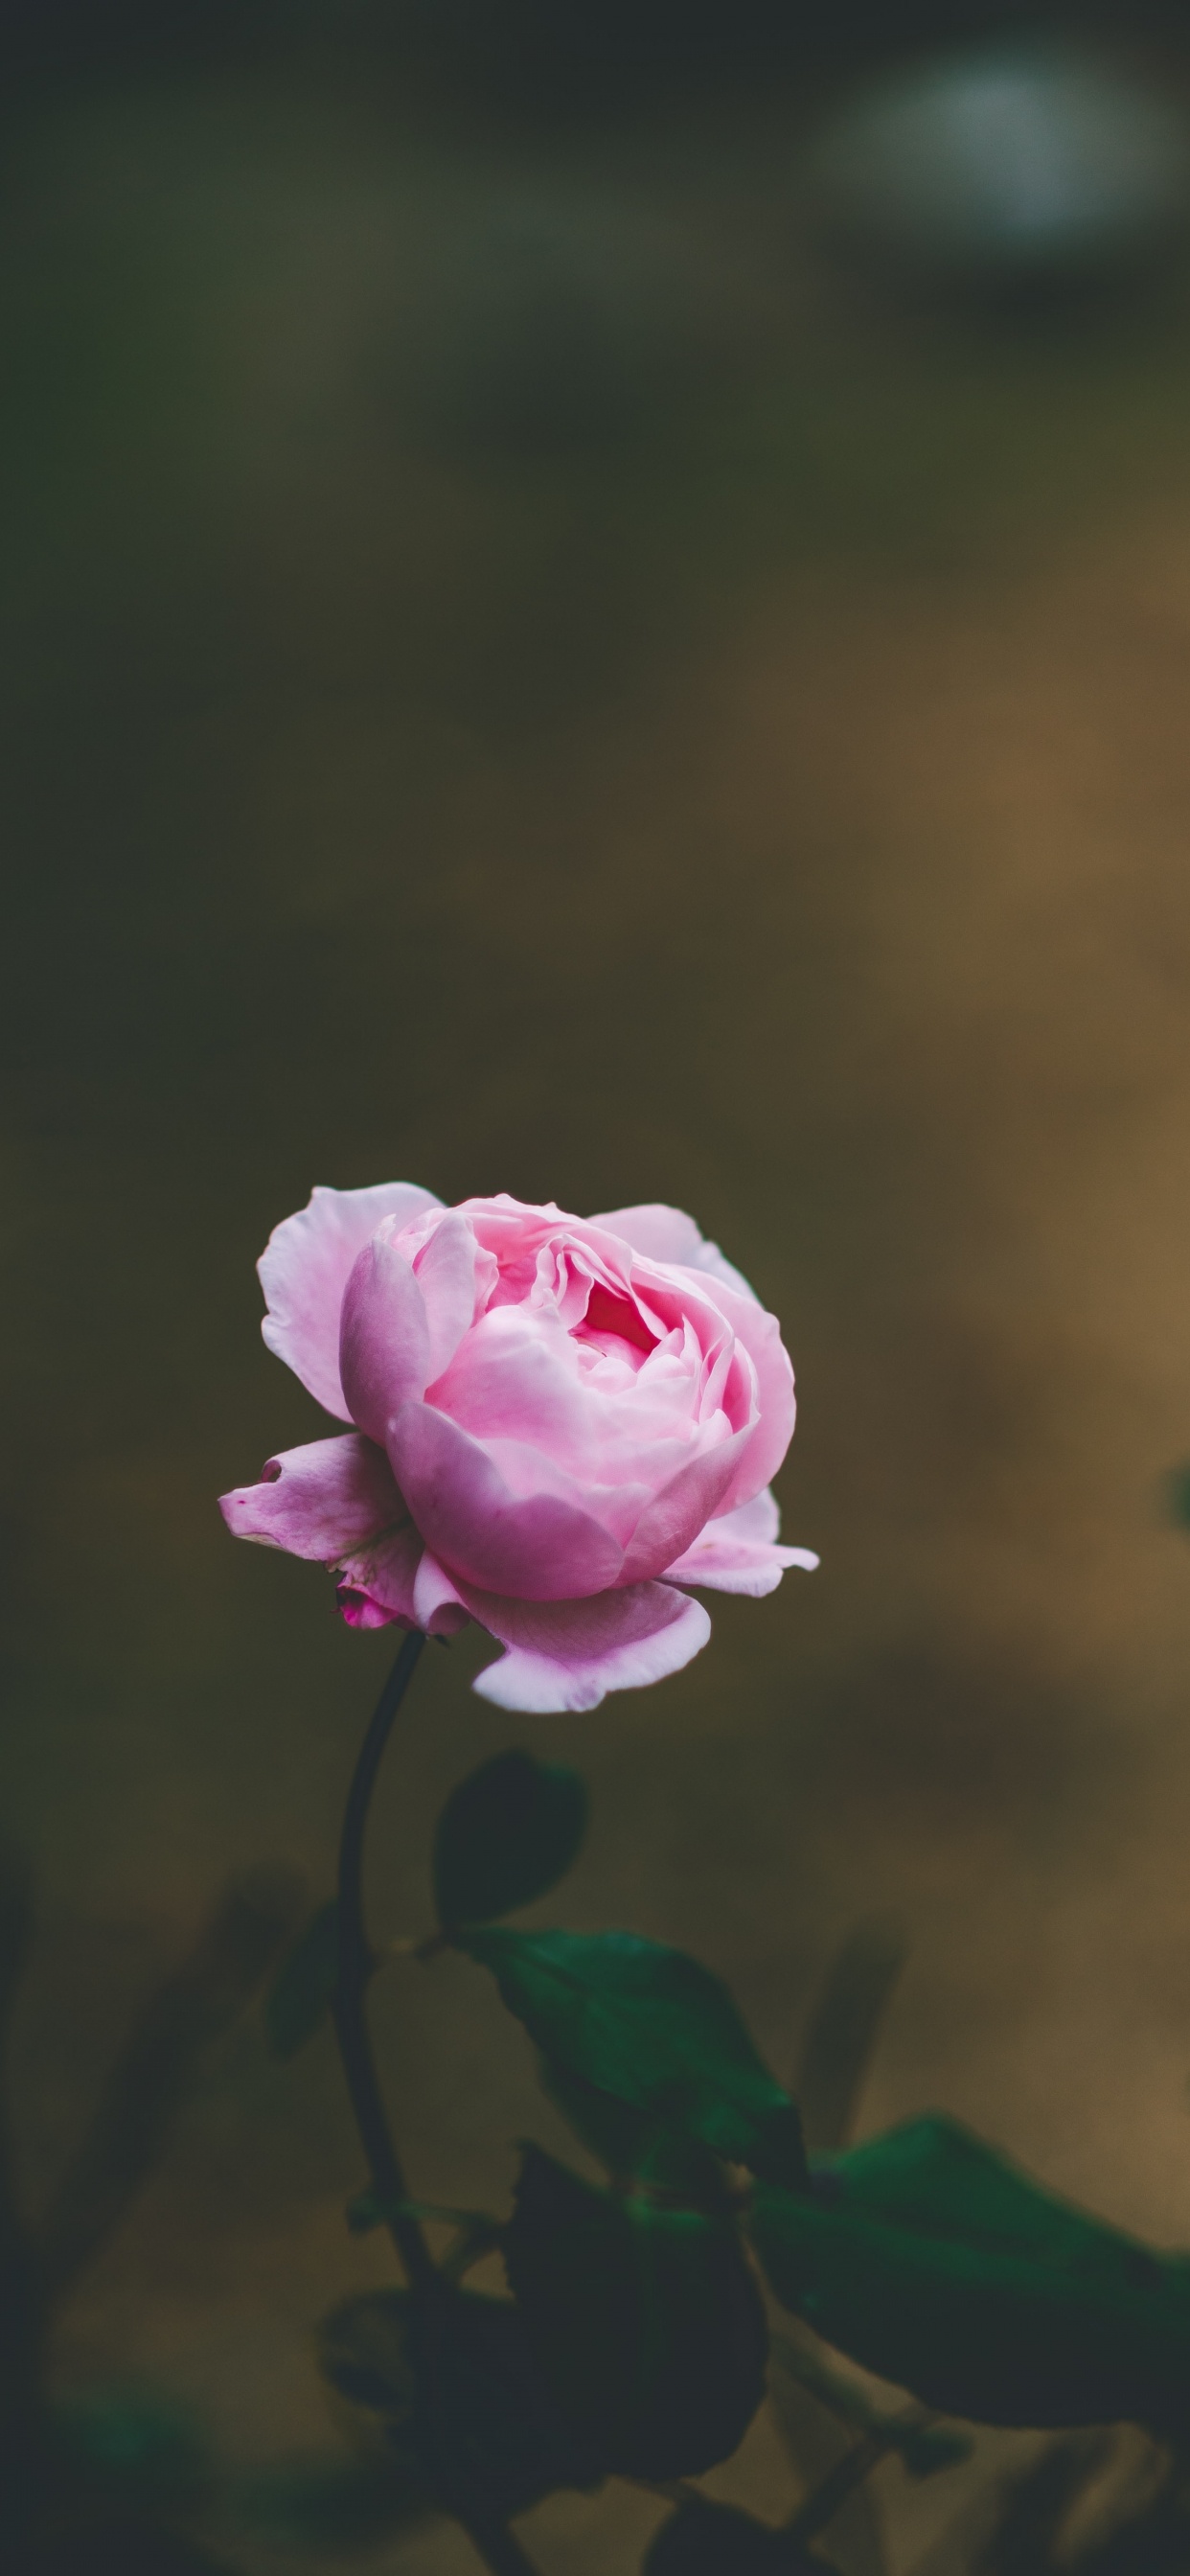 Pink Rose in Bloom During Daytime. Wallpaper in 1242x2688 Resolution